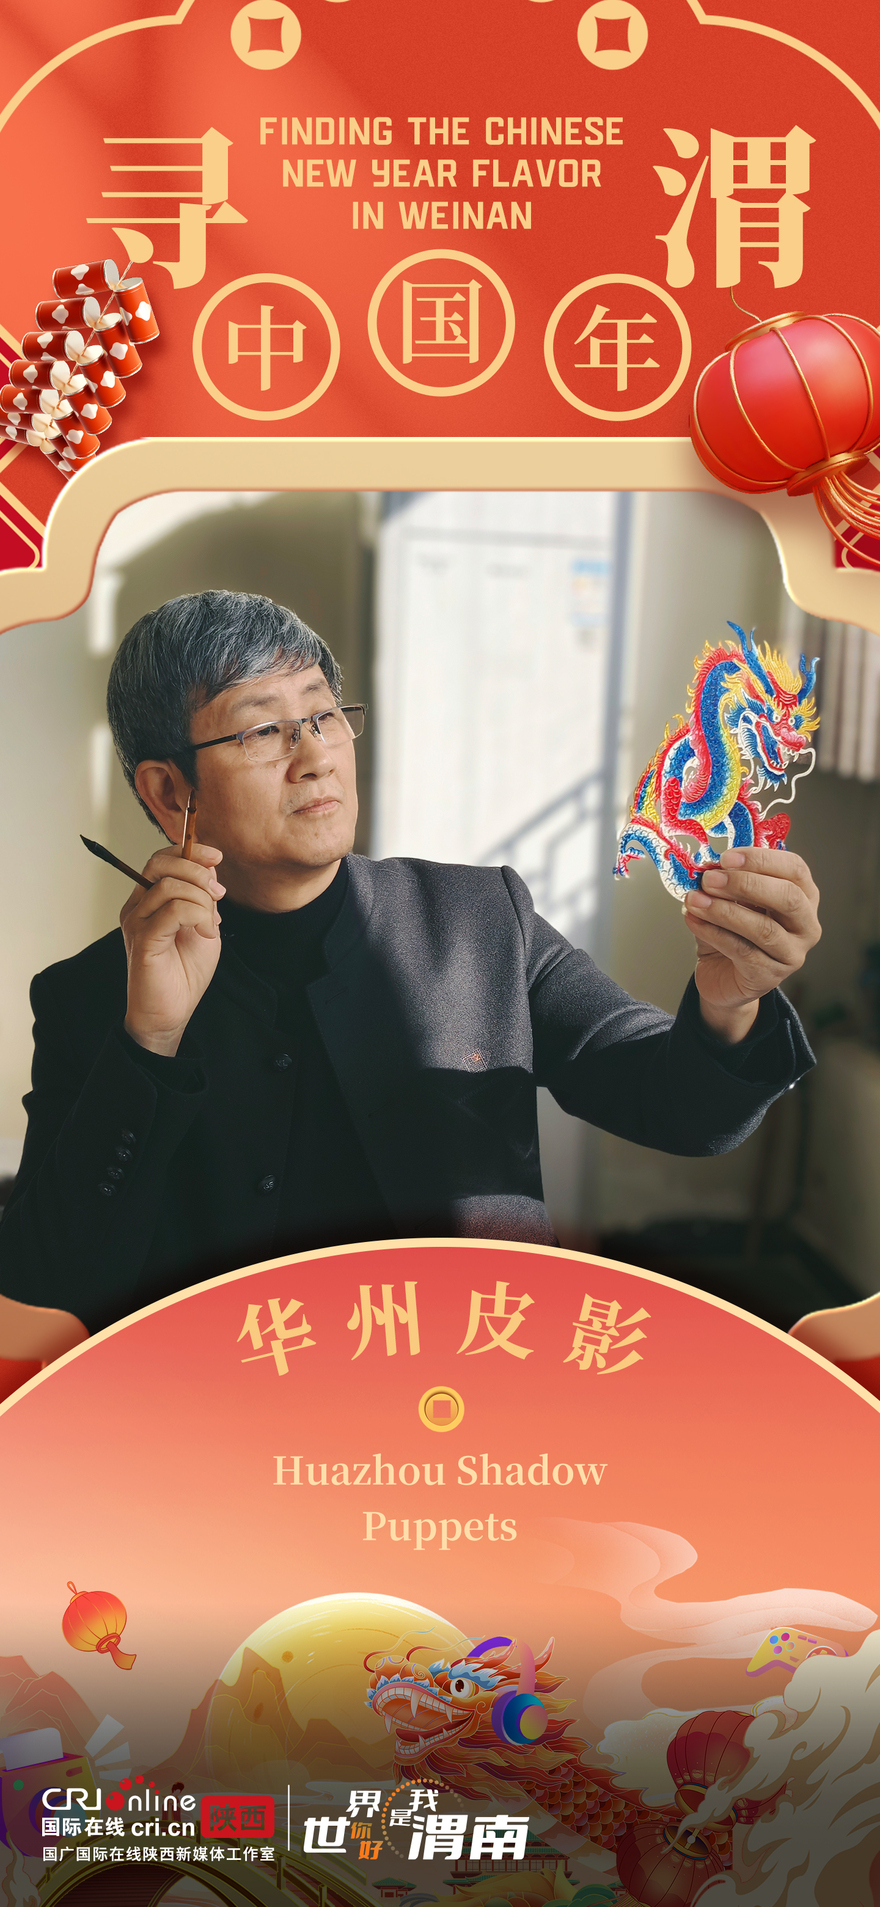 Finding the Chinese New Year Flavor in Weinan_fororder_微信图片_20240209111204